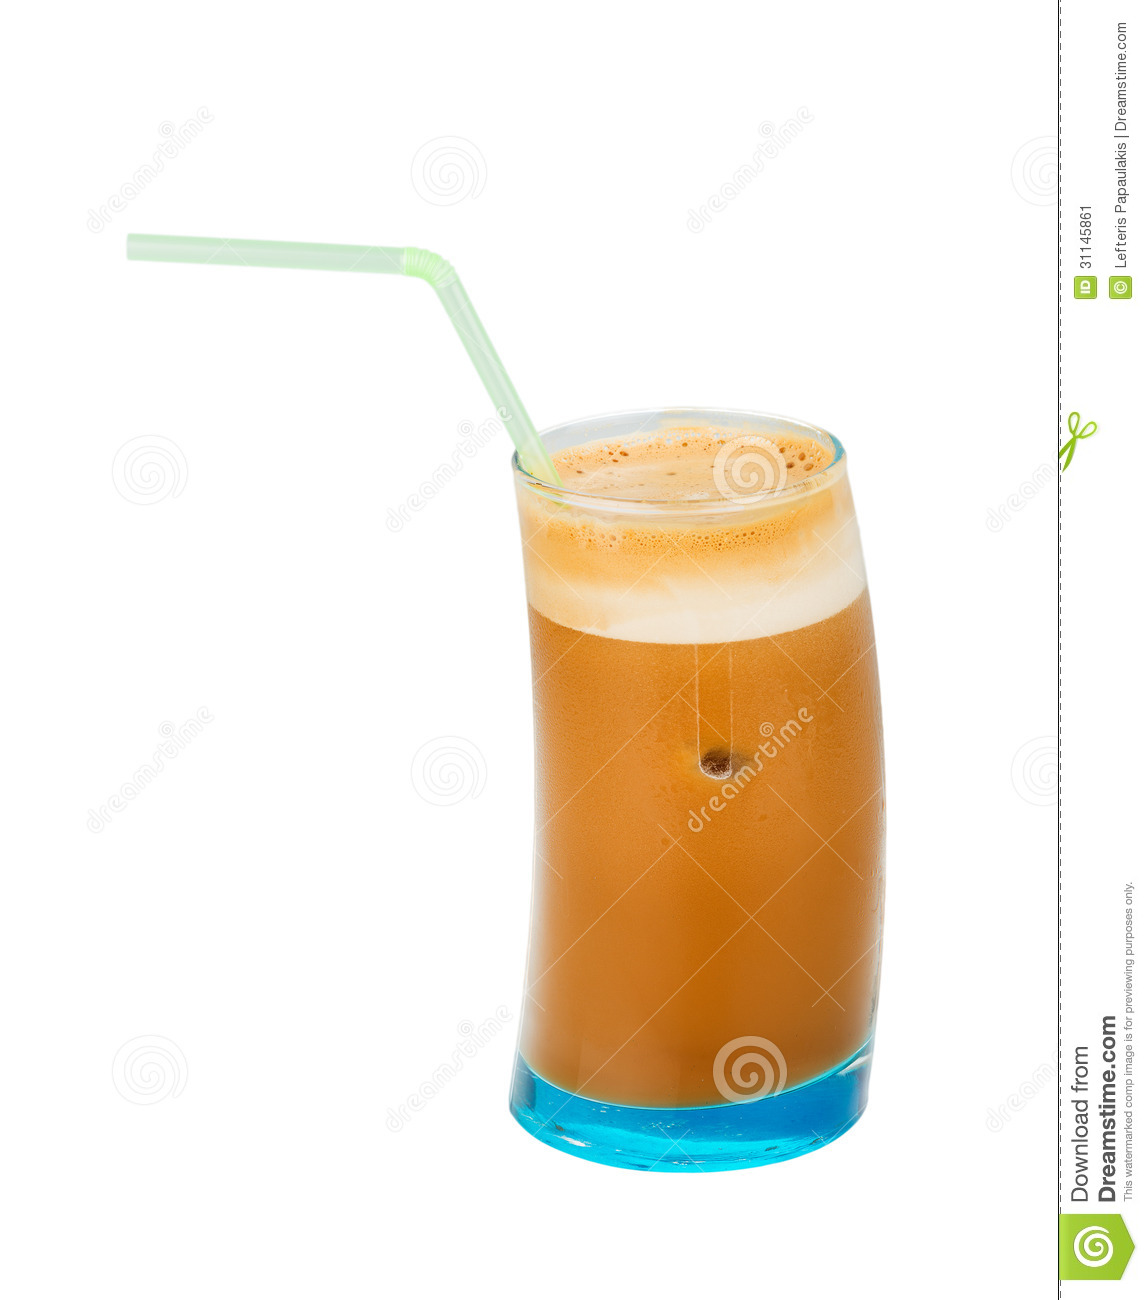 Frappe Iced Coffee Isolated Stock Image   Image  31145861